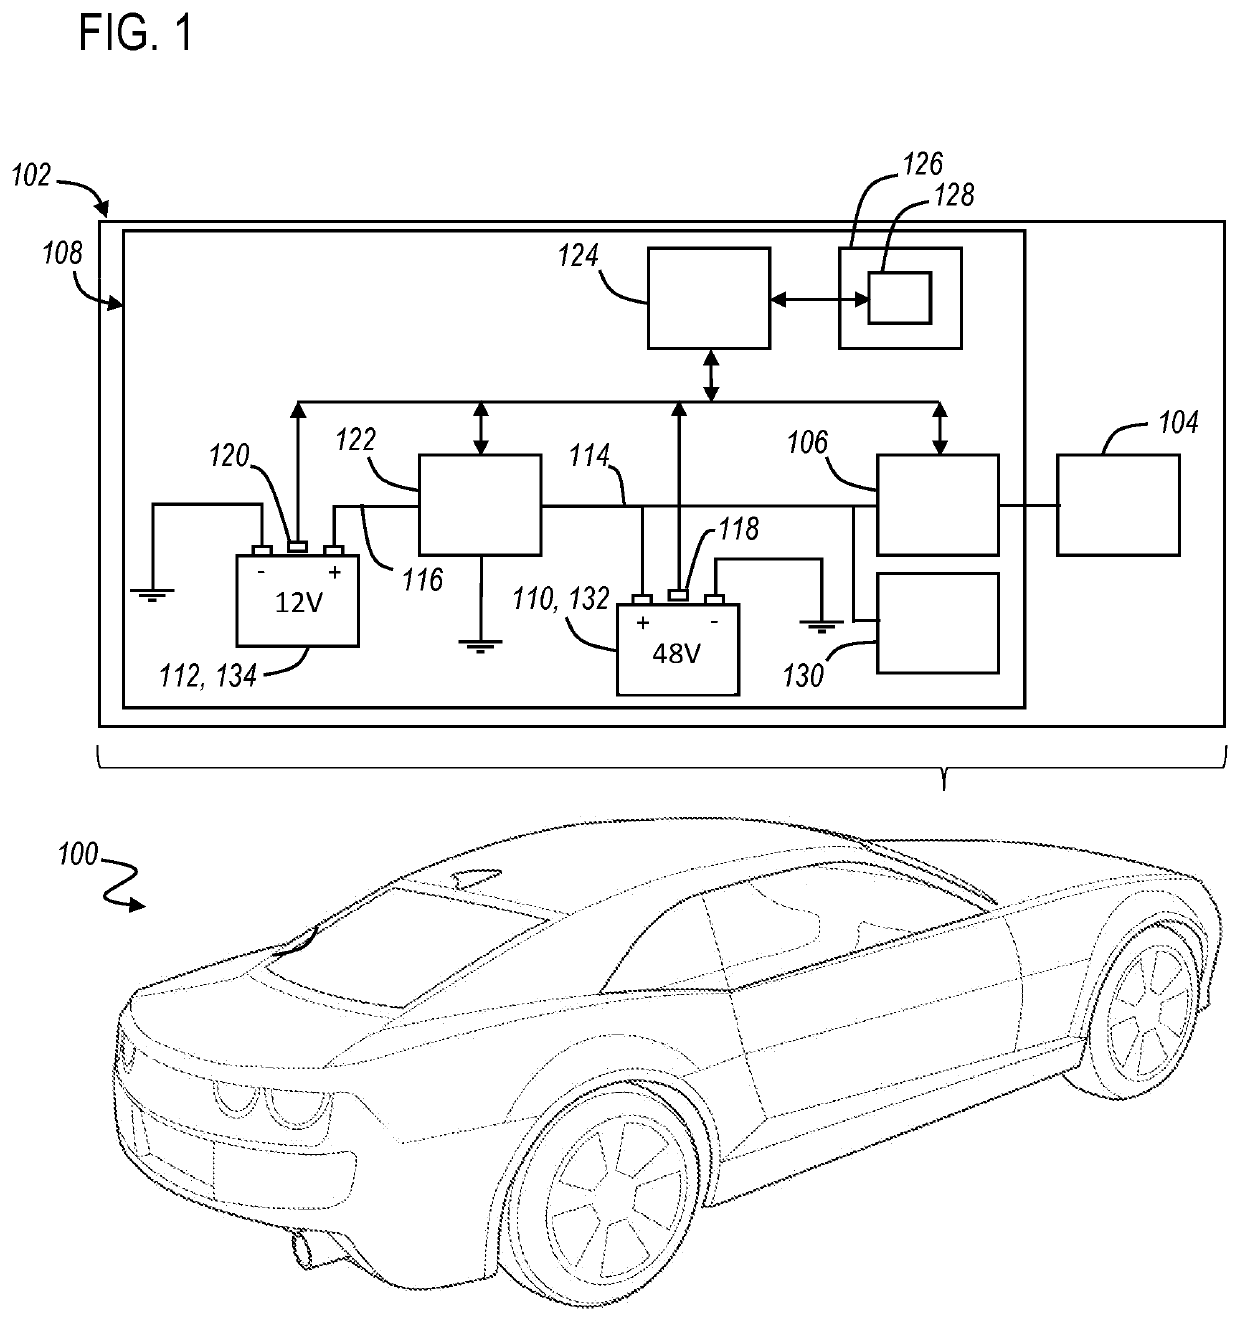 Energy storage system with multiple battery modules for a vehicle propulsion system